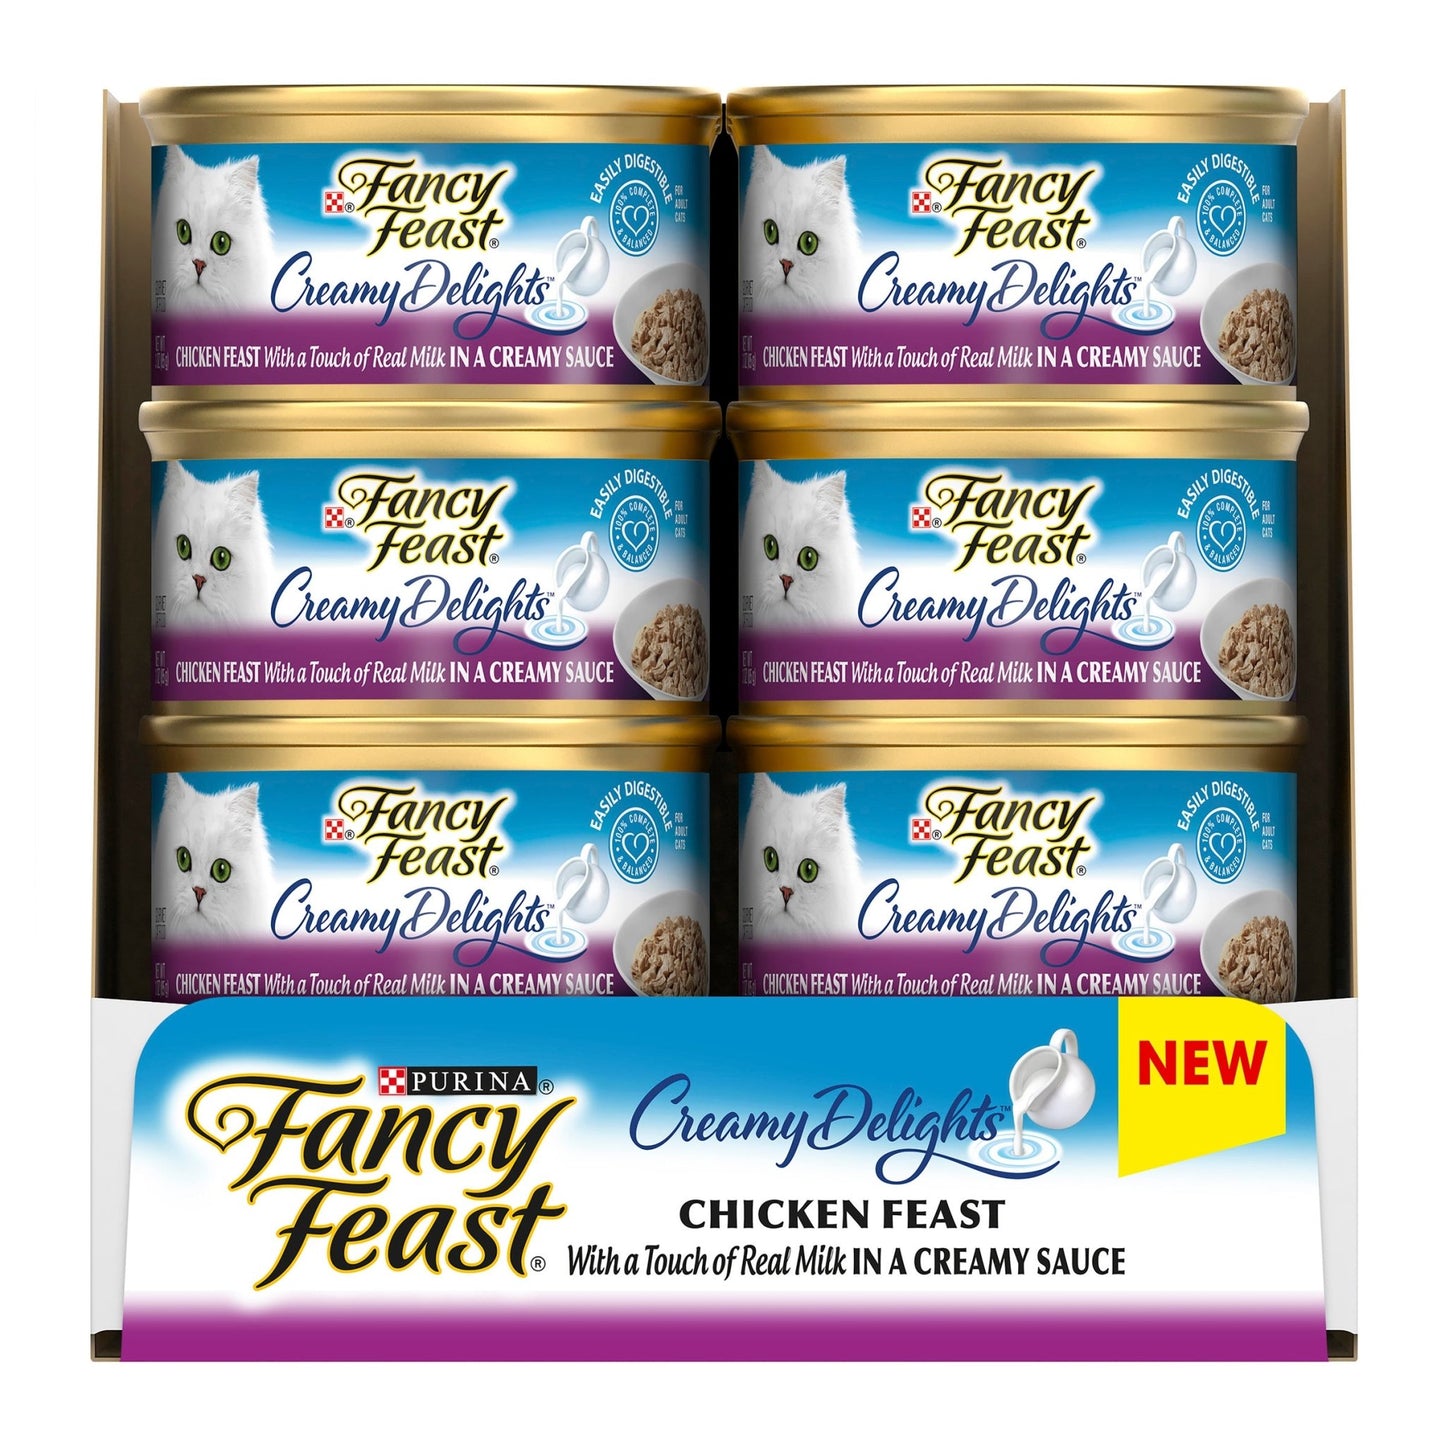 Fancy Feast Creamy Delights Grilled Chicken 24x85g - Woonona Petfood & Produce